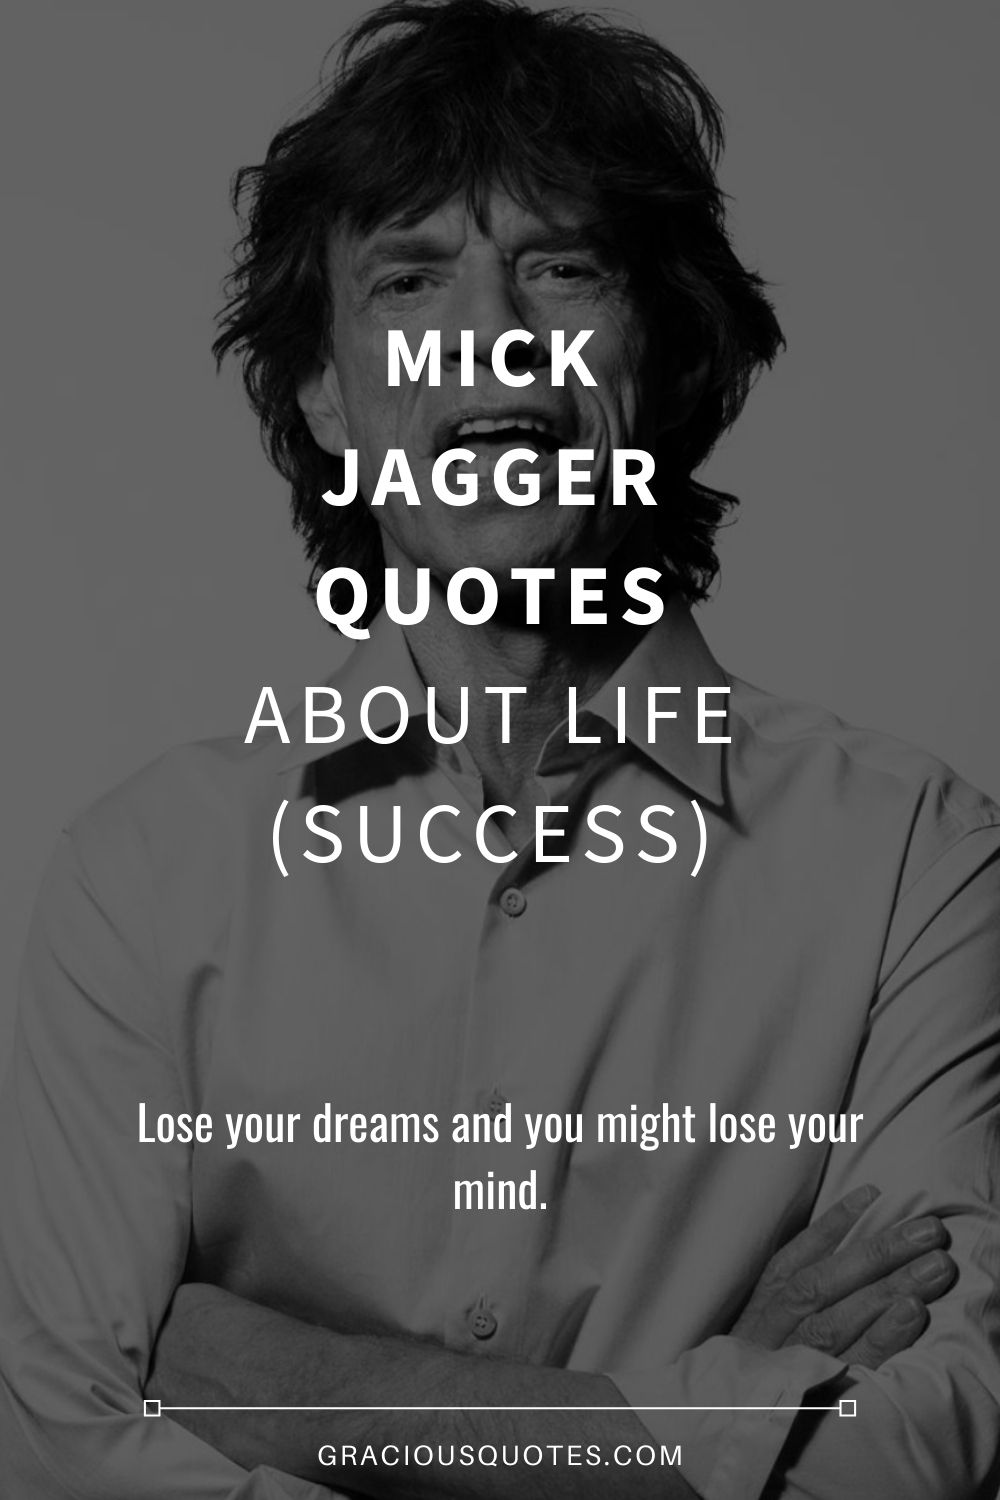 Mick Jagger Quotes About Life (SUCCESS) - Gracious Quotes